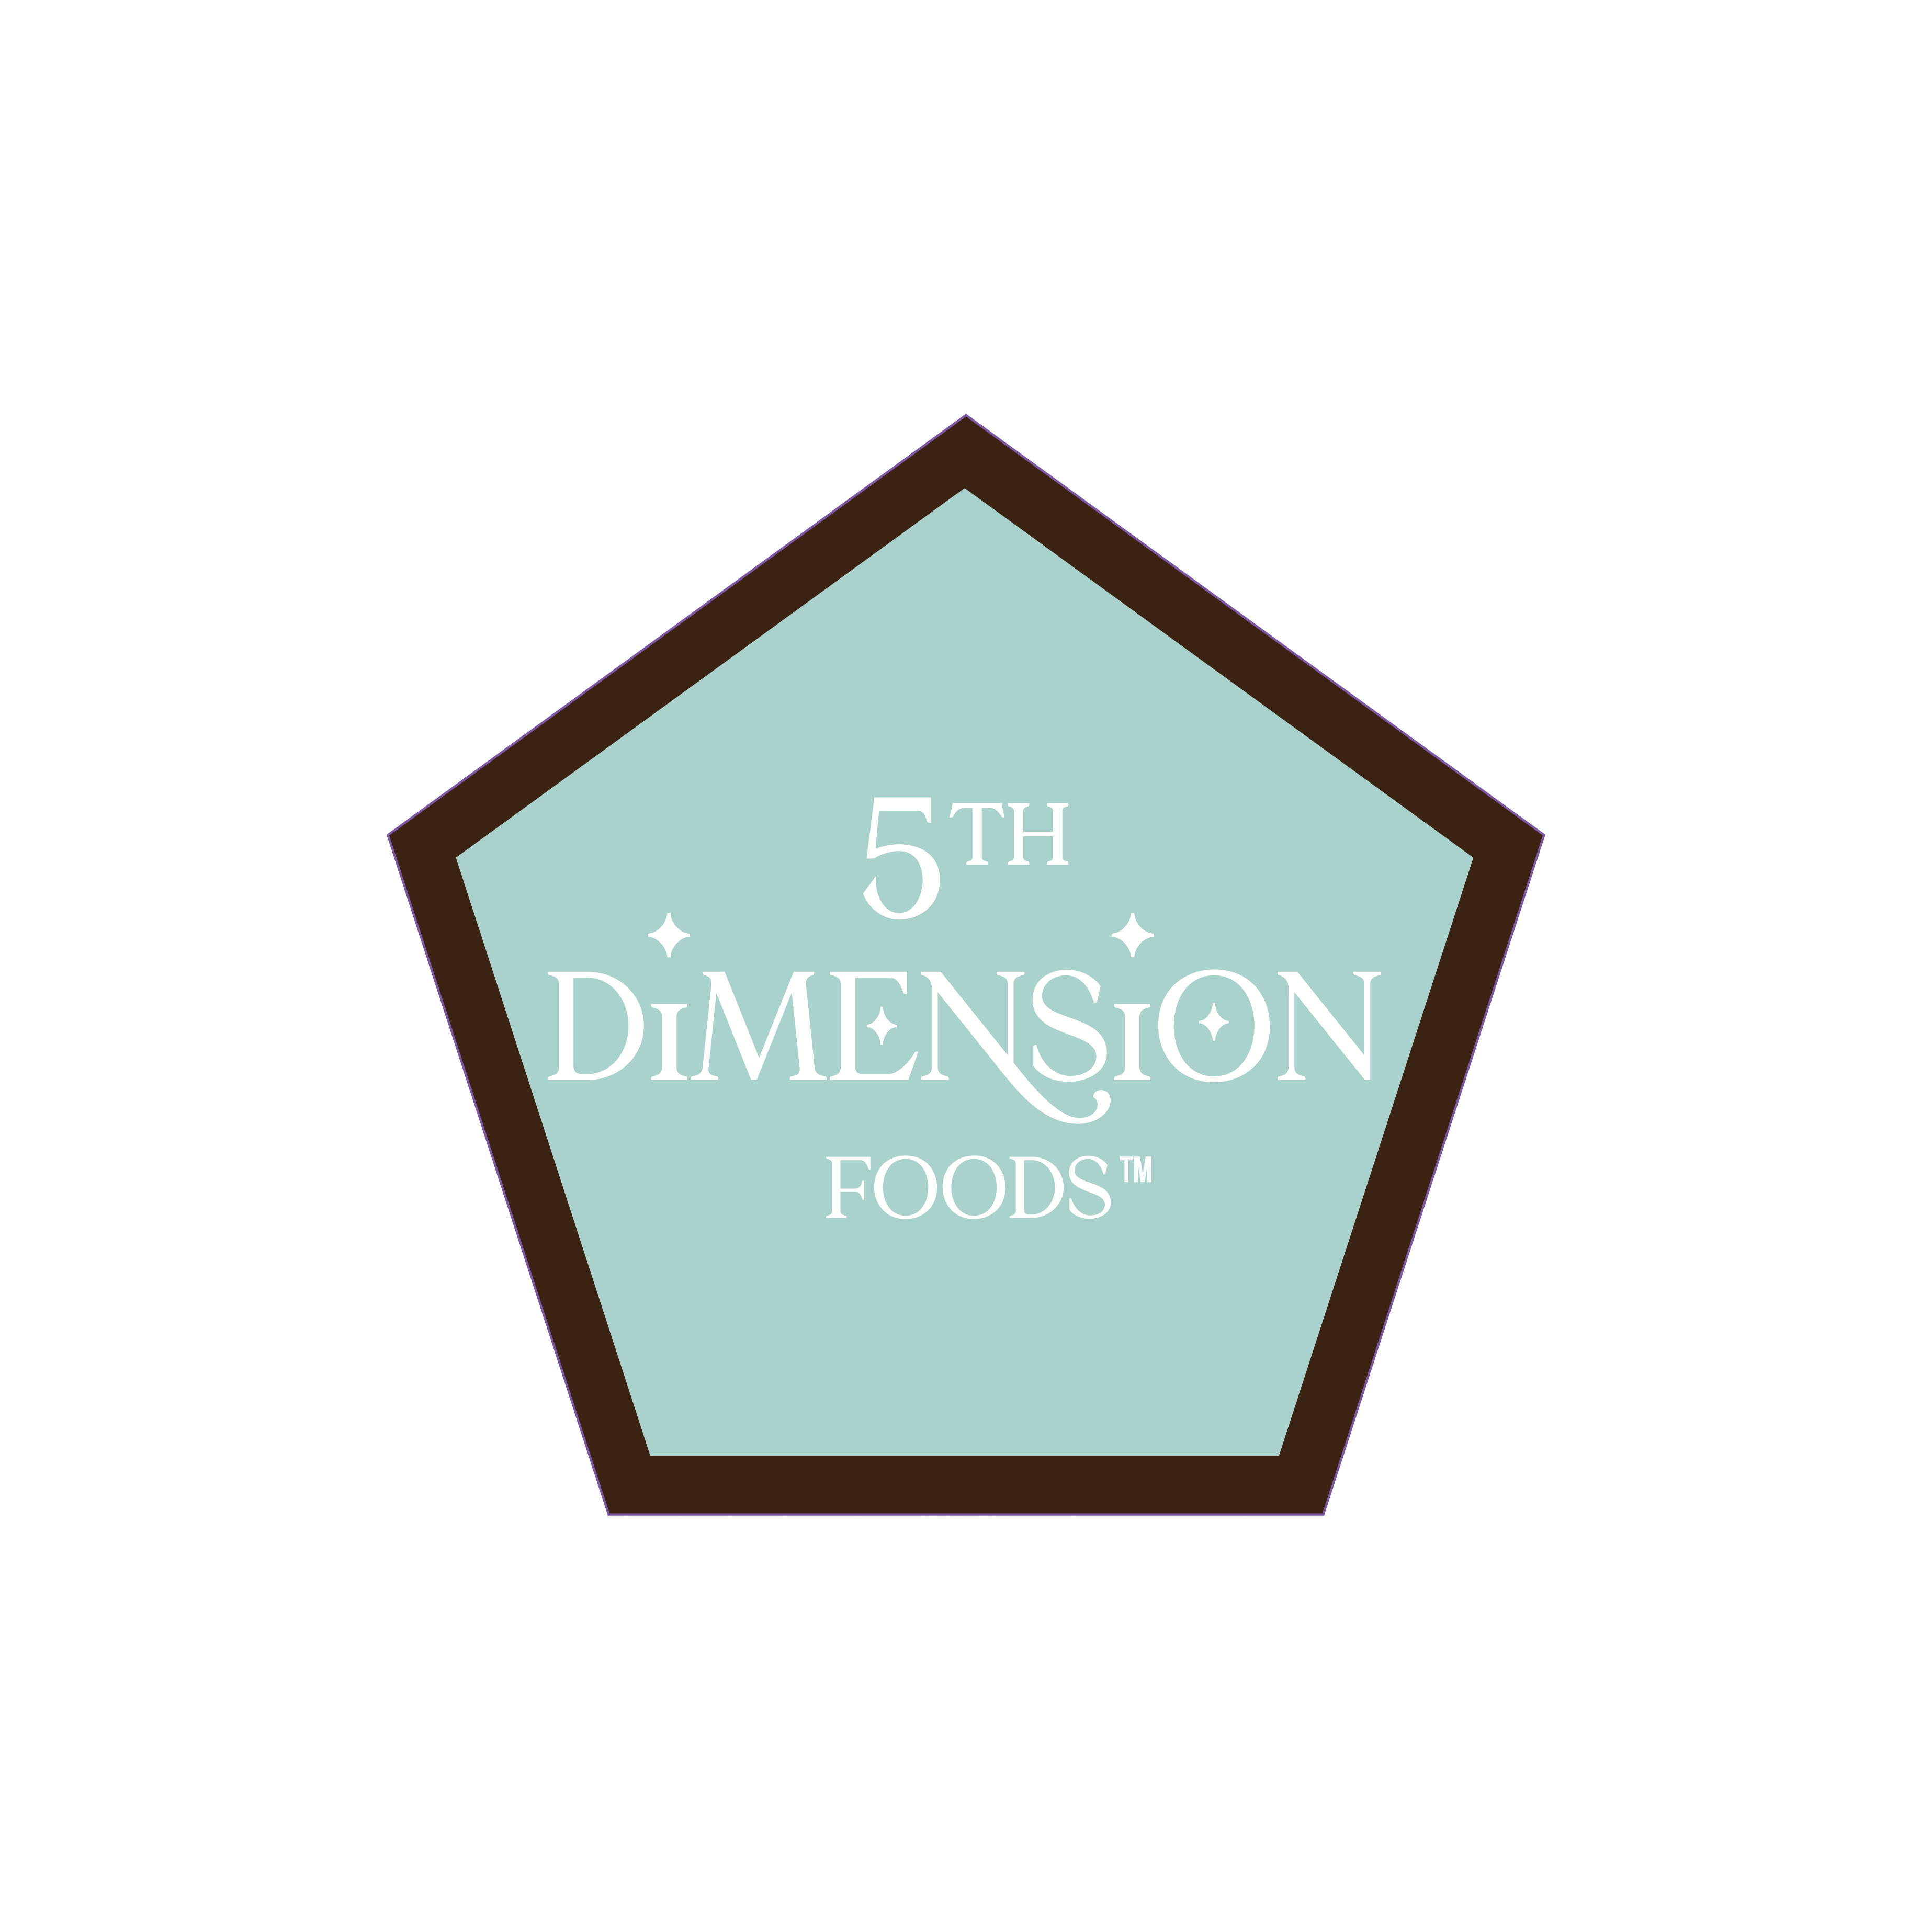 5th Dimension Foods